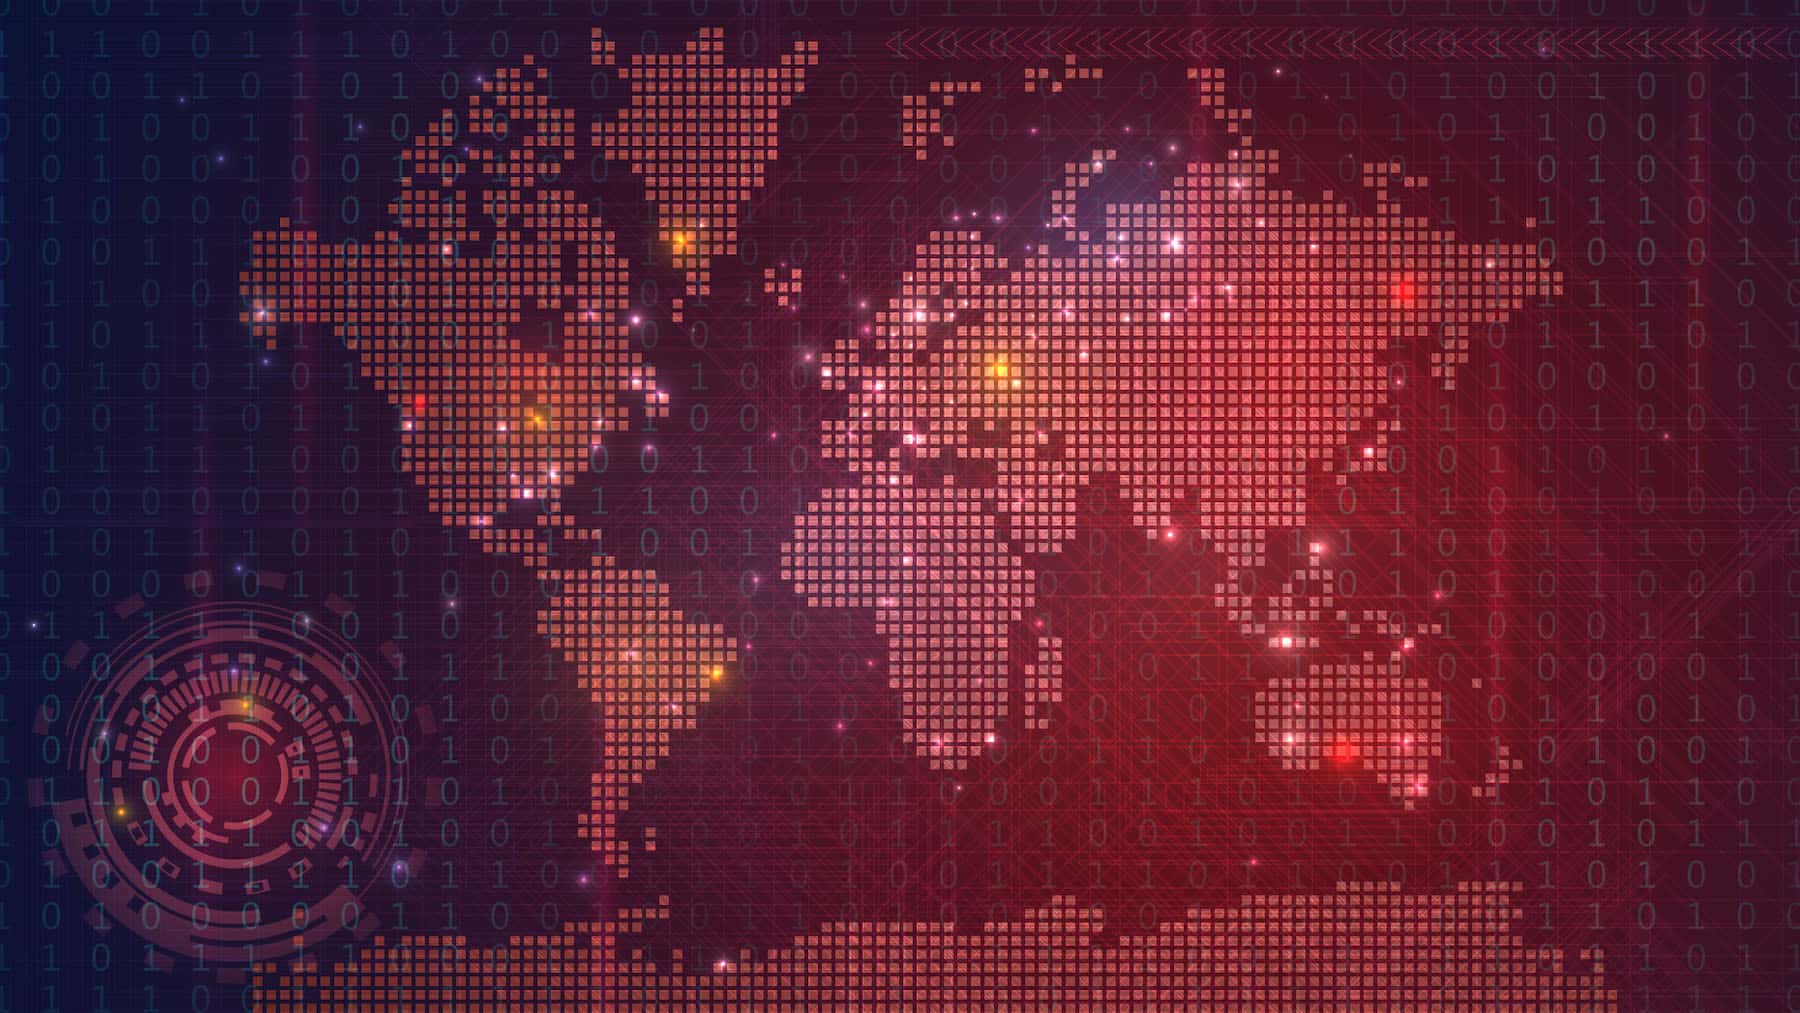 Red-tinged map of the world, looking like cybercrimes are being monitored